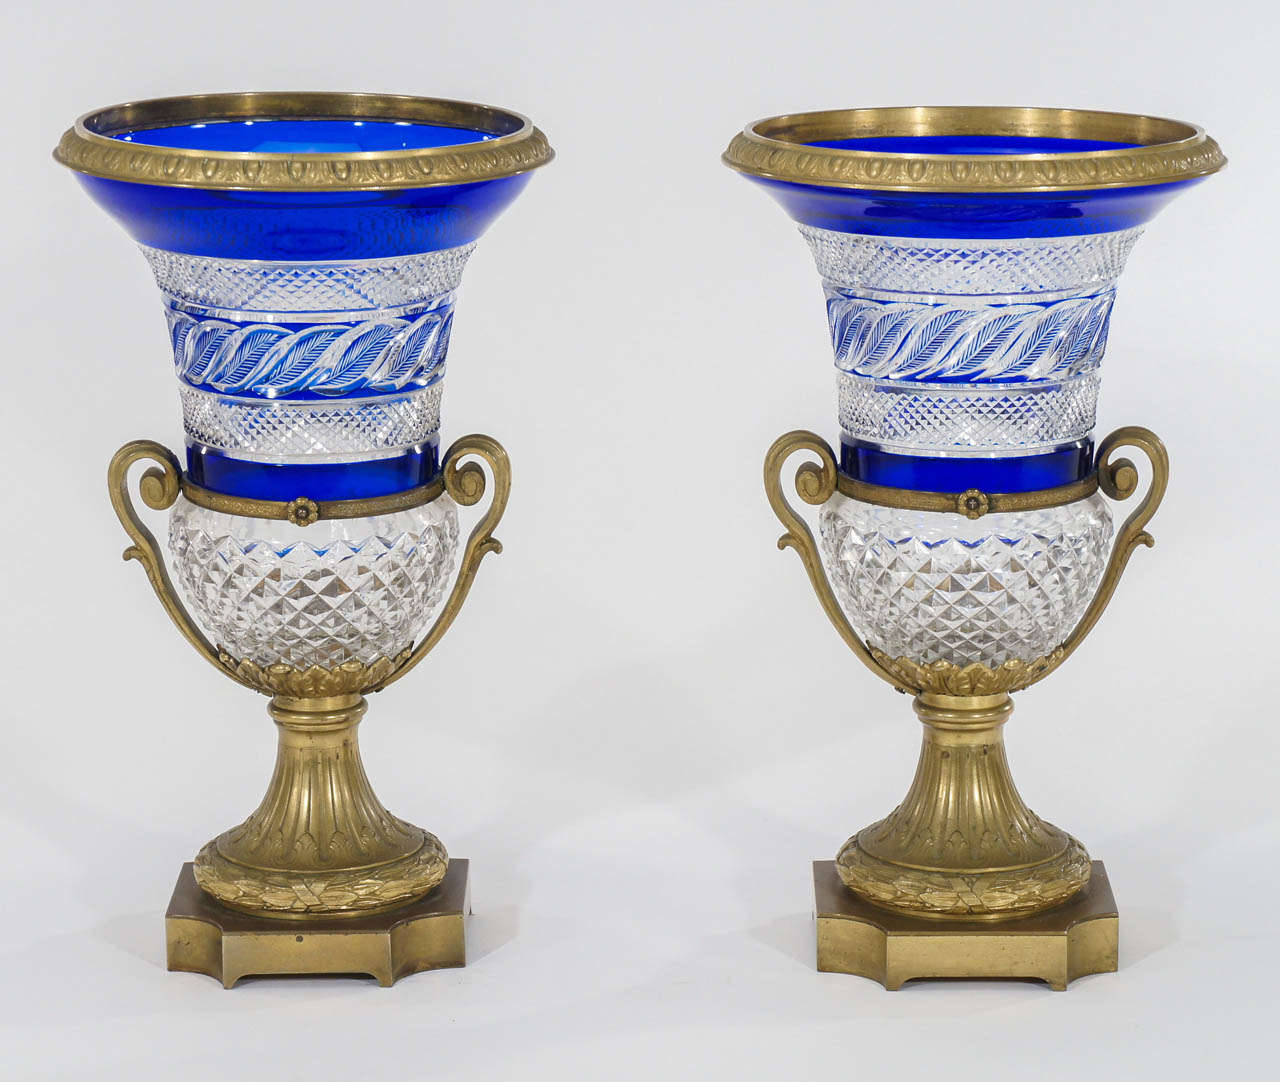 A pair of stunning 19th century Russian, cobalt cut to clear crystal mantel vases with Austrian bronze mounts. The bronze molded handles and elegant bases frame the amazing leaf and diamond point cut pattern in the crystal. These vases were